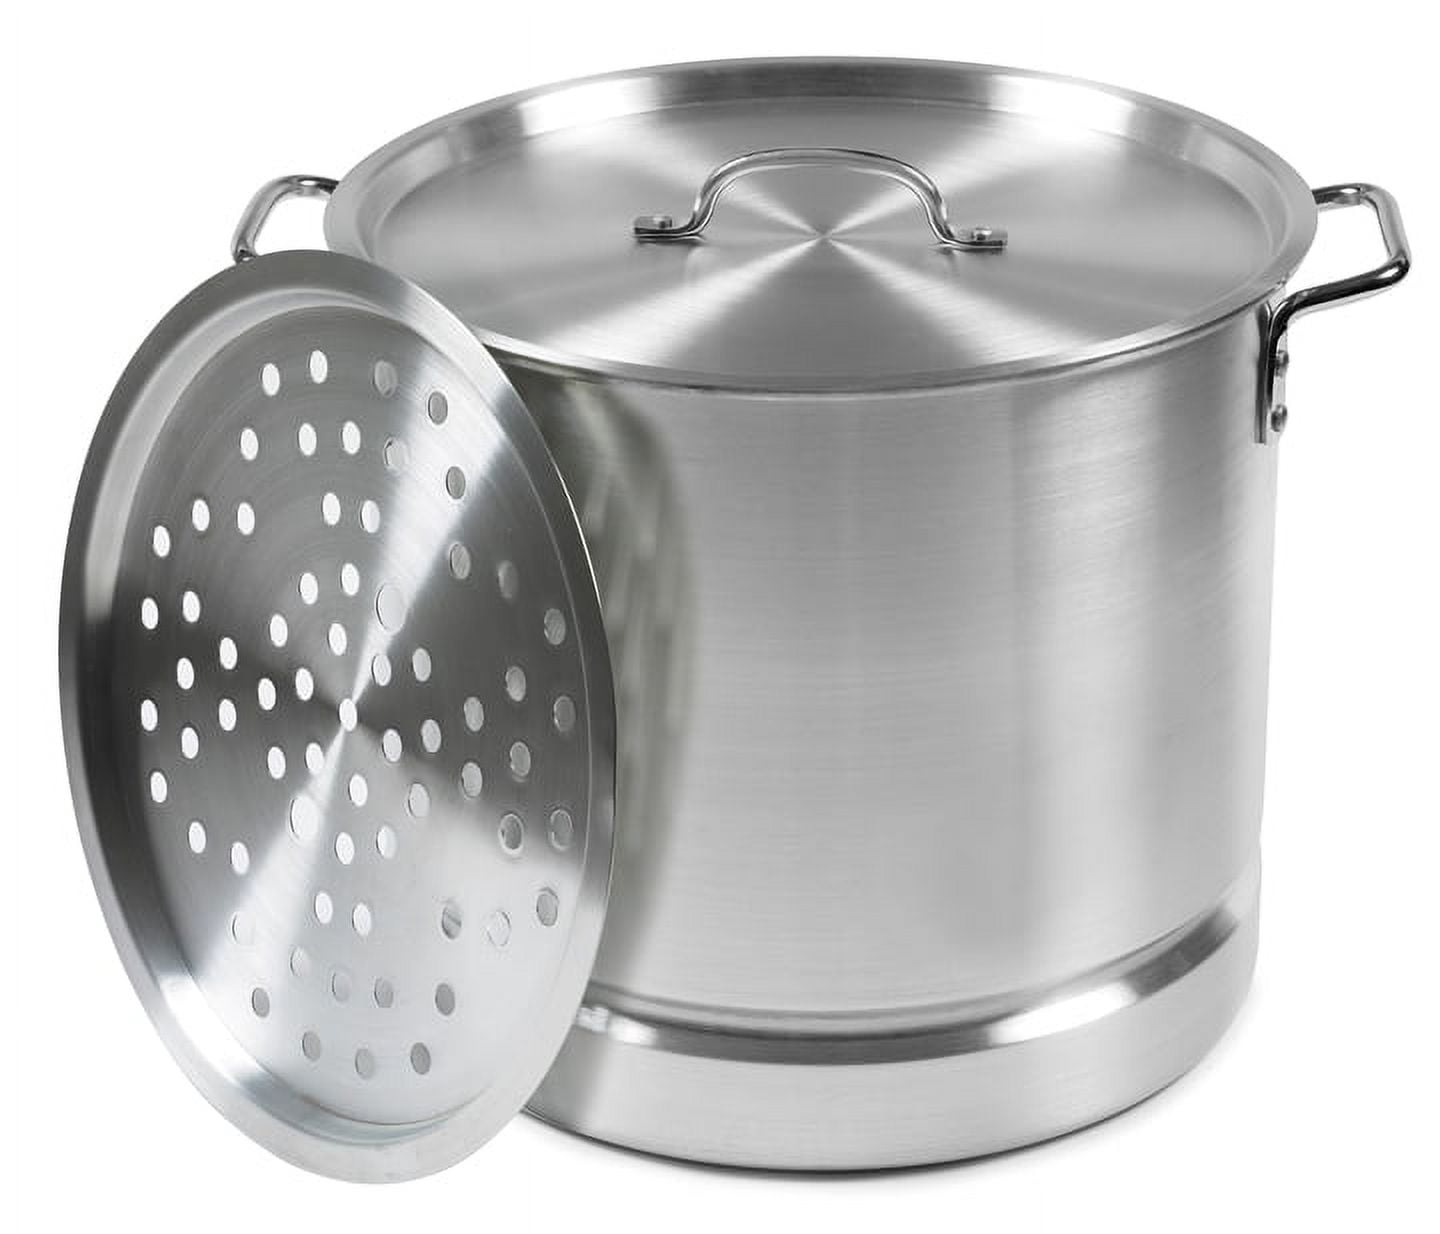 Imusa Tamale/Seafood Steamer with Lid & Insert